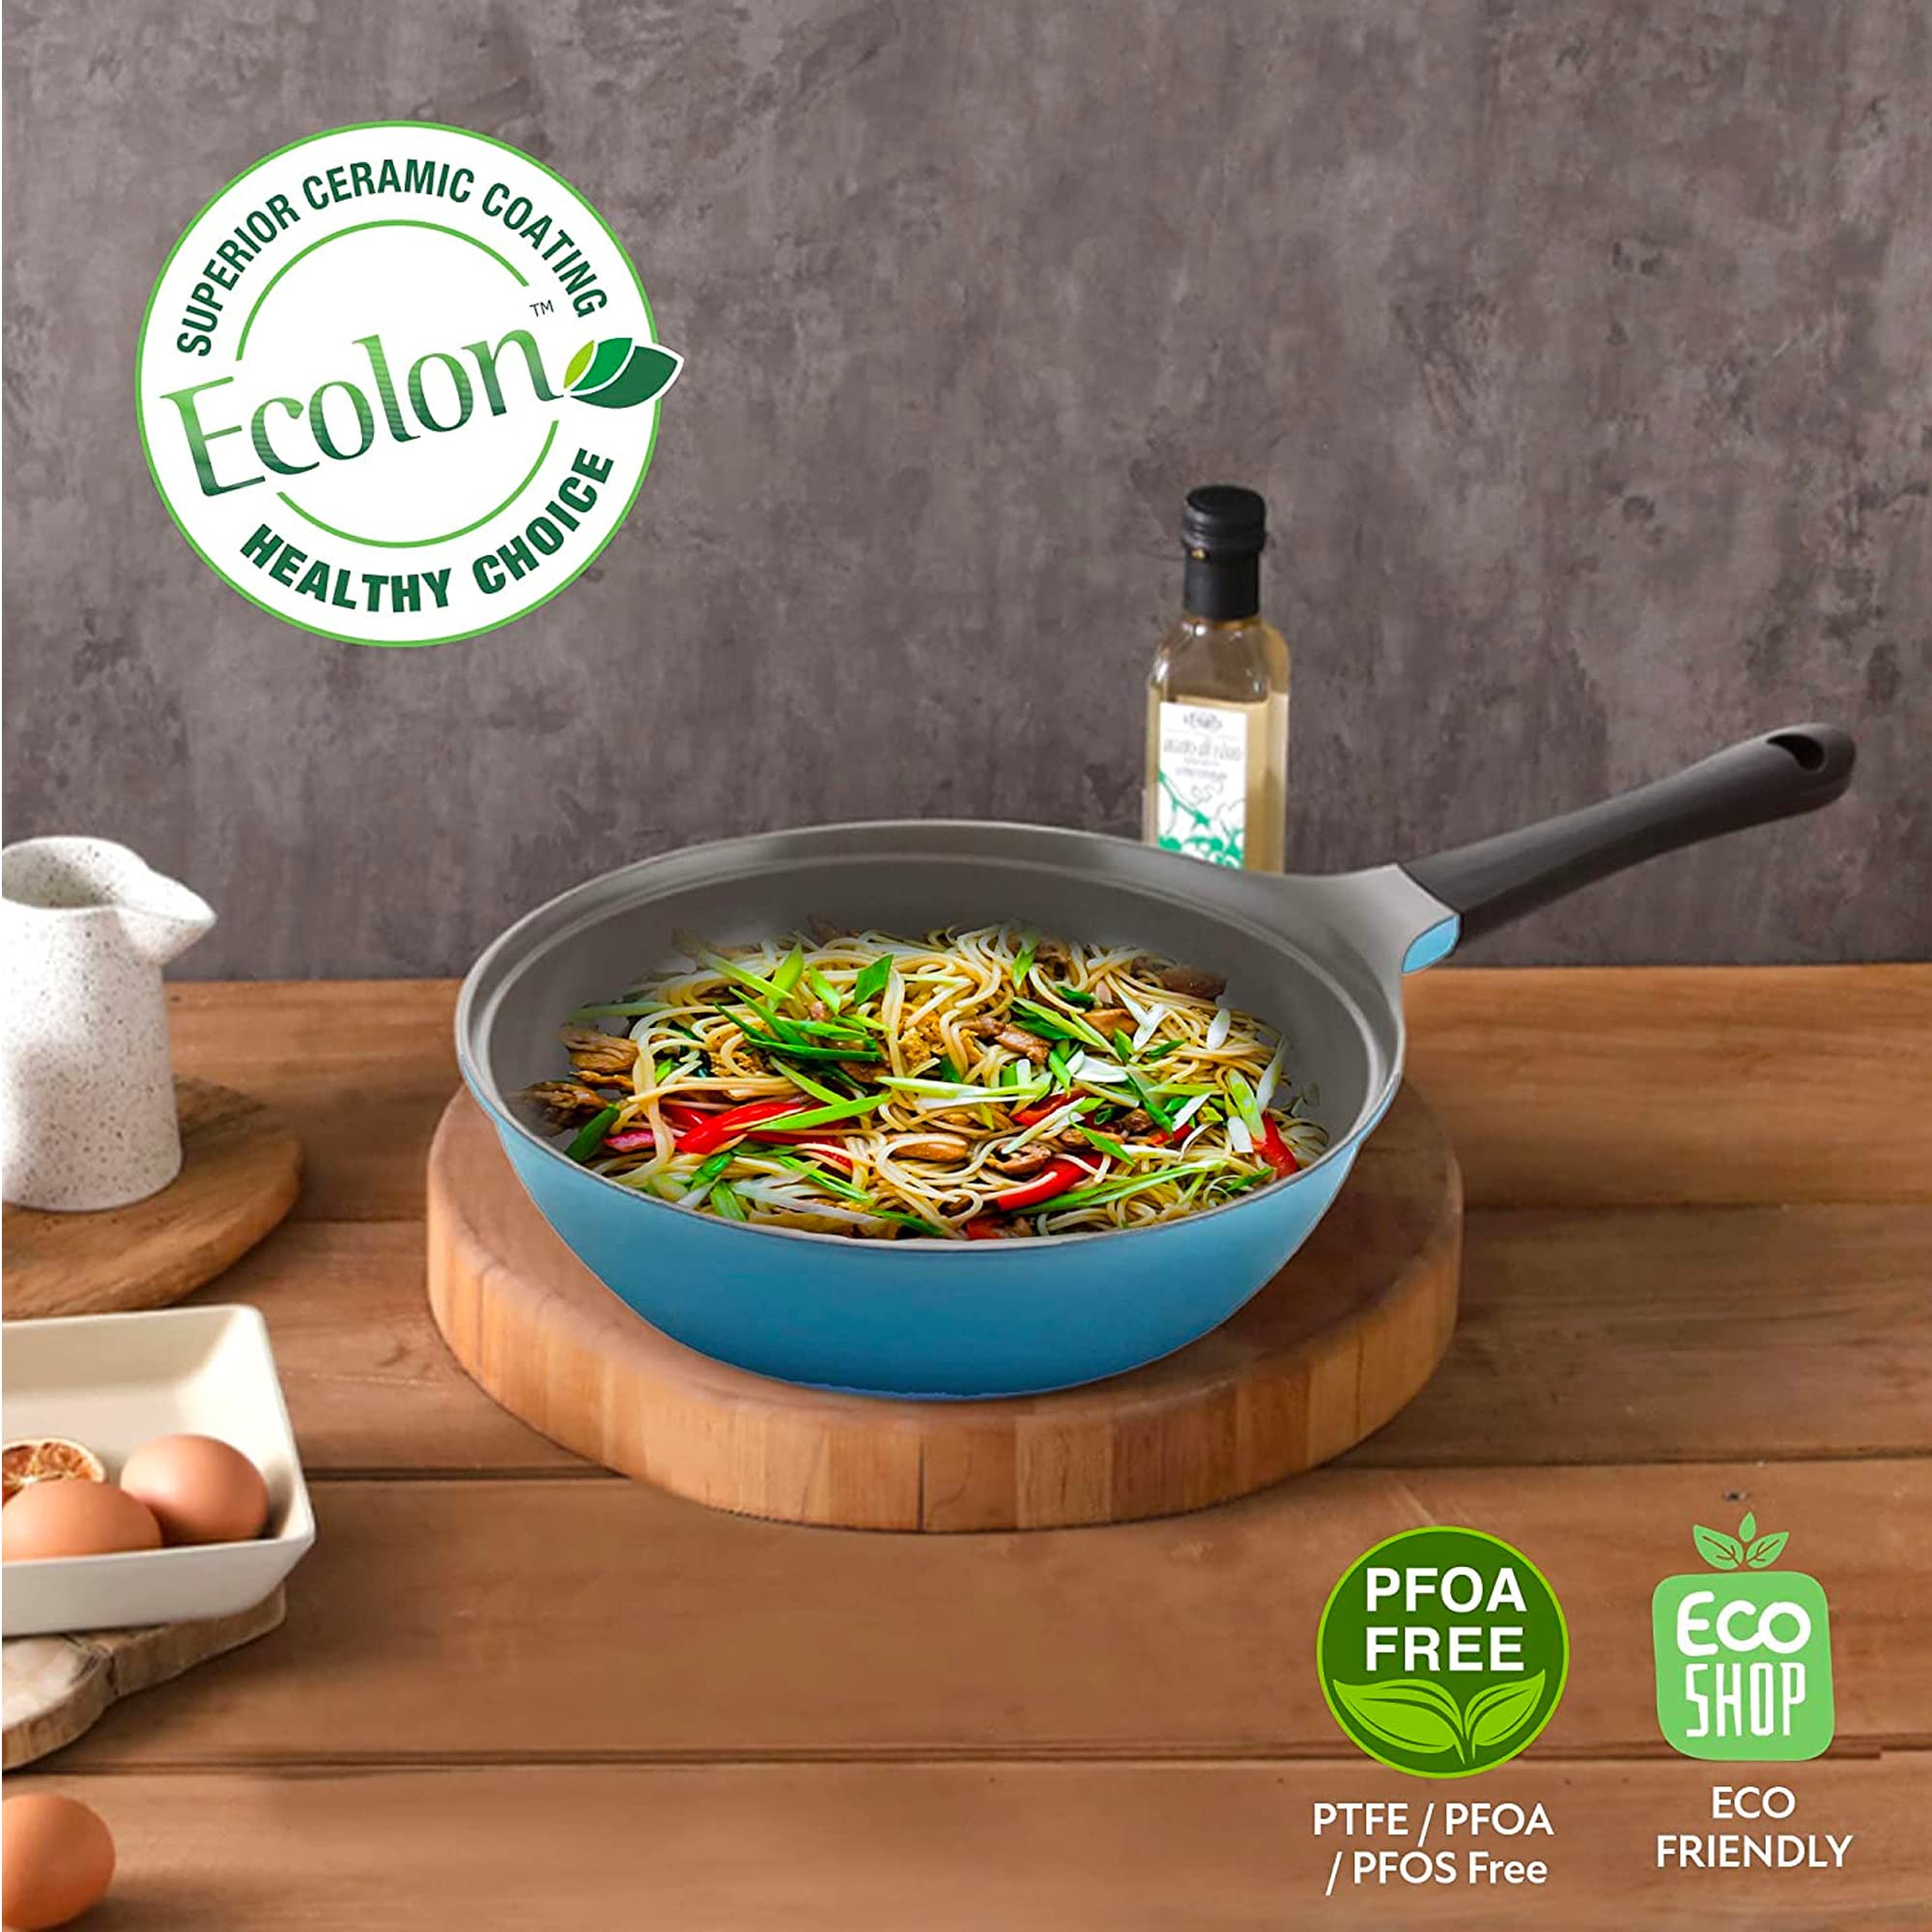 Neoflam Eela 12'' Non Stick Chef's Wok with Glass Lid, Stir Fry Pan and POFA-Free Ceramic Coating for Cooking Saute Vegetables, Meat, Fish, 12 inch, Deep Blue (Handle assemble required)